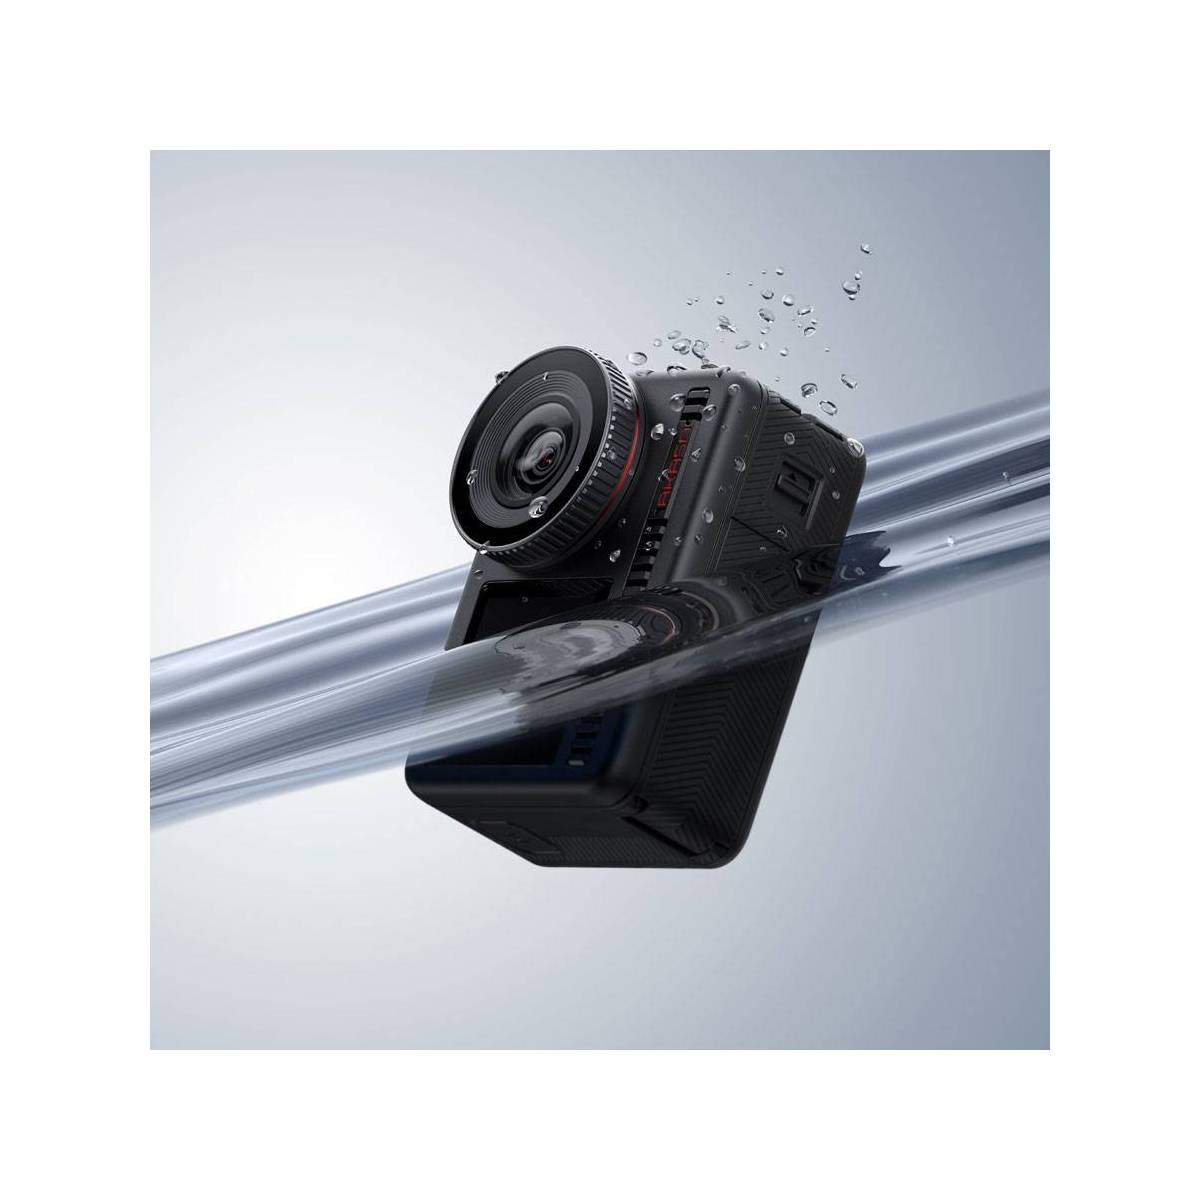  AKASO Brave 8 4K60FPS Action Camera, 48MP Photo Touch